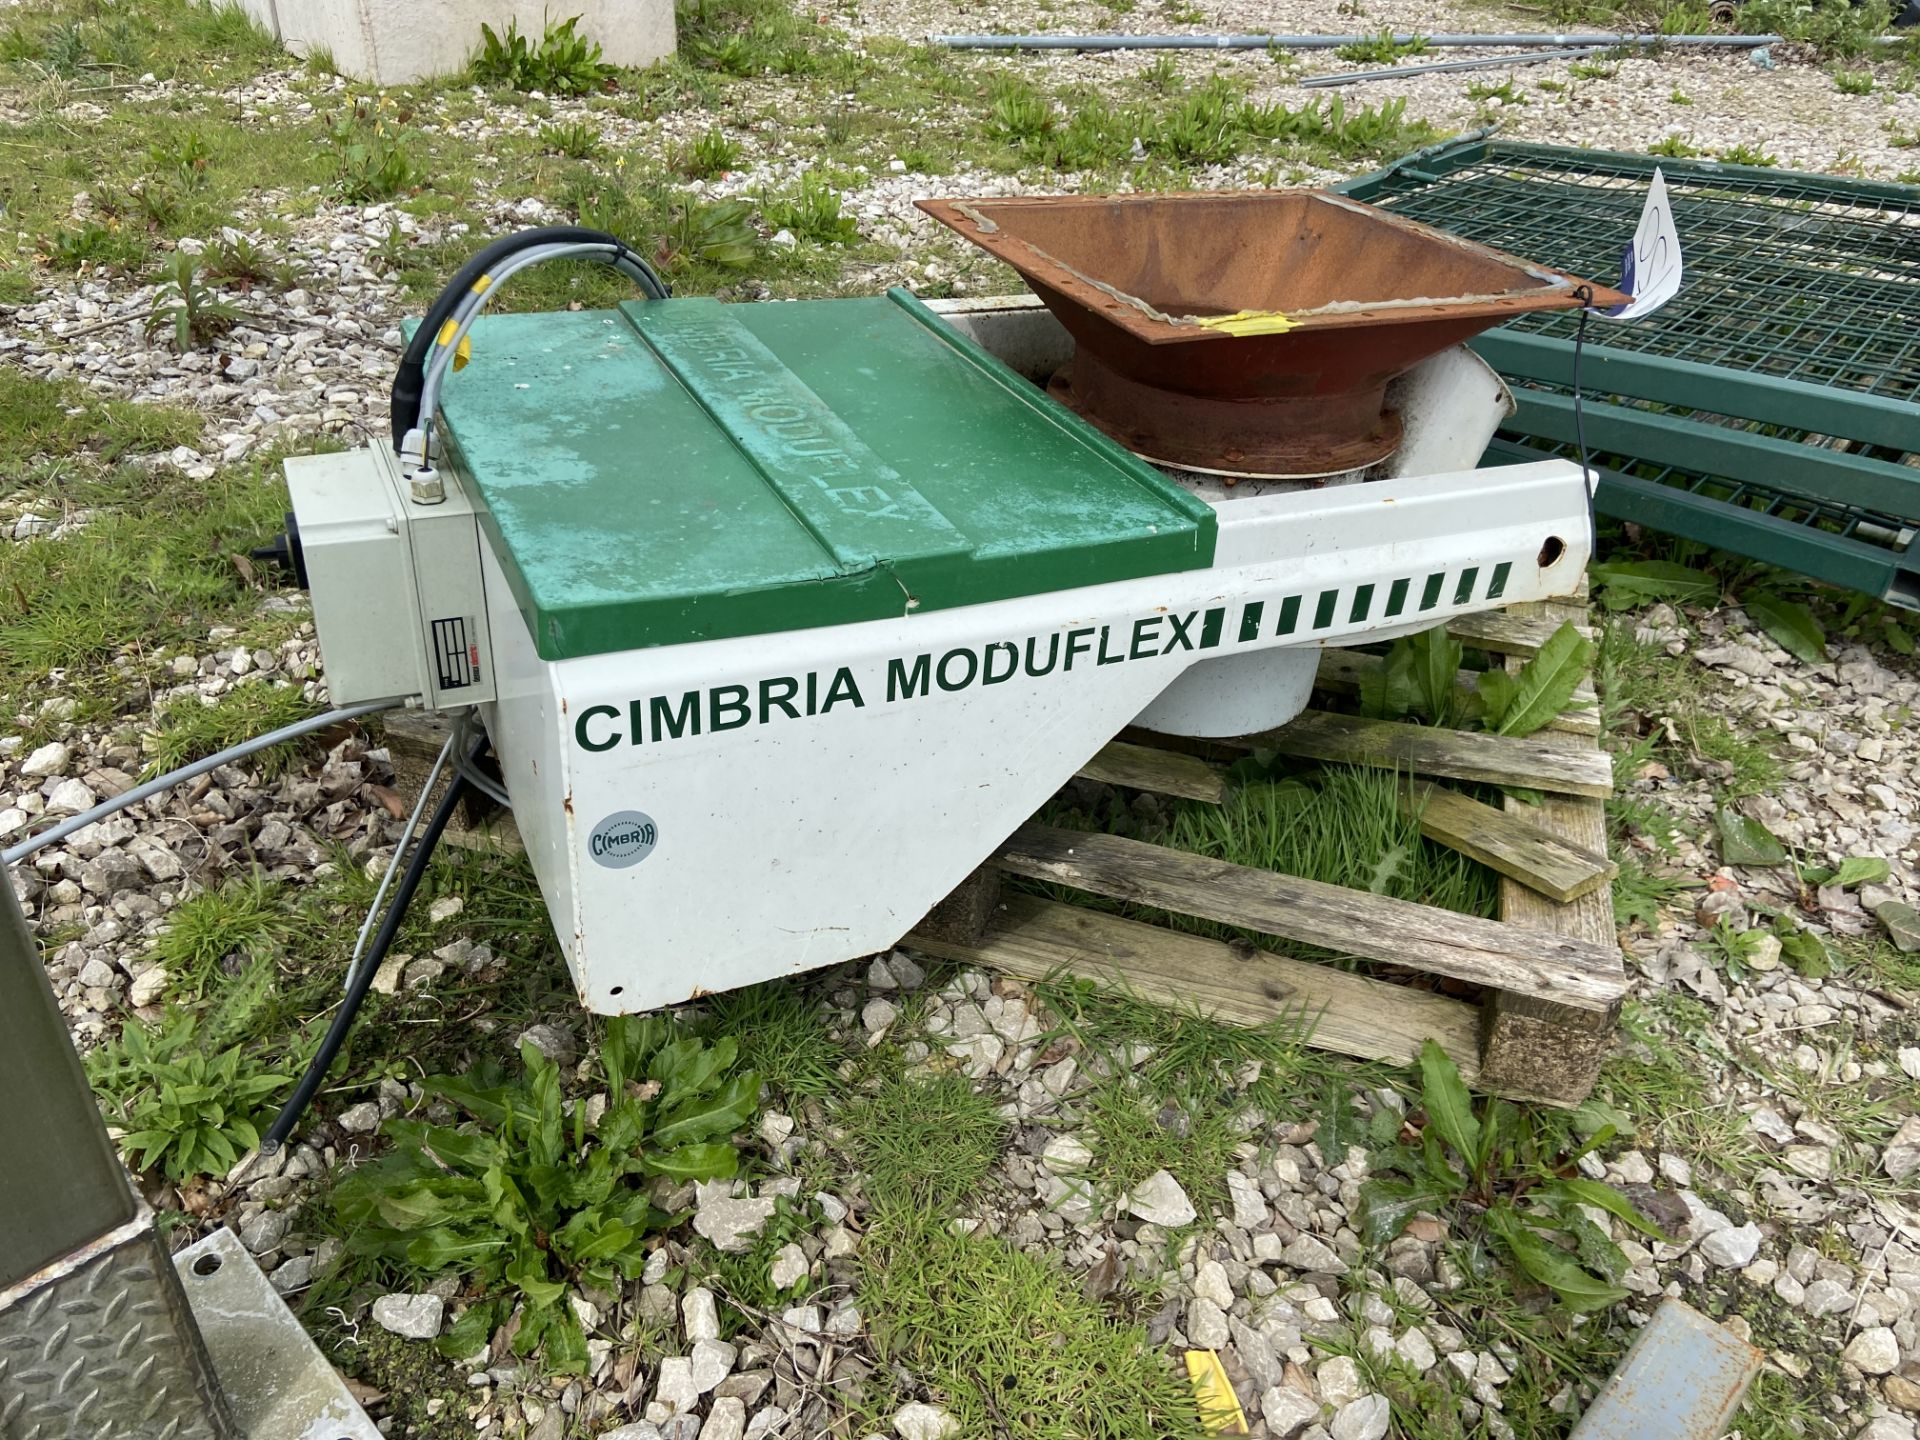 Cymbria Moduflex S300F/17 Loading Chute, serial no. 5868, year of manufacture 2000, lot located in